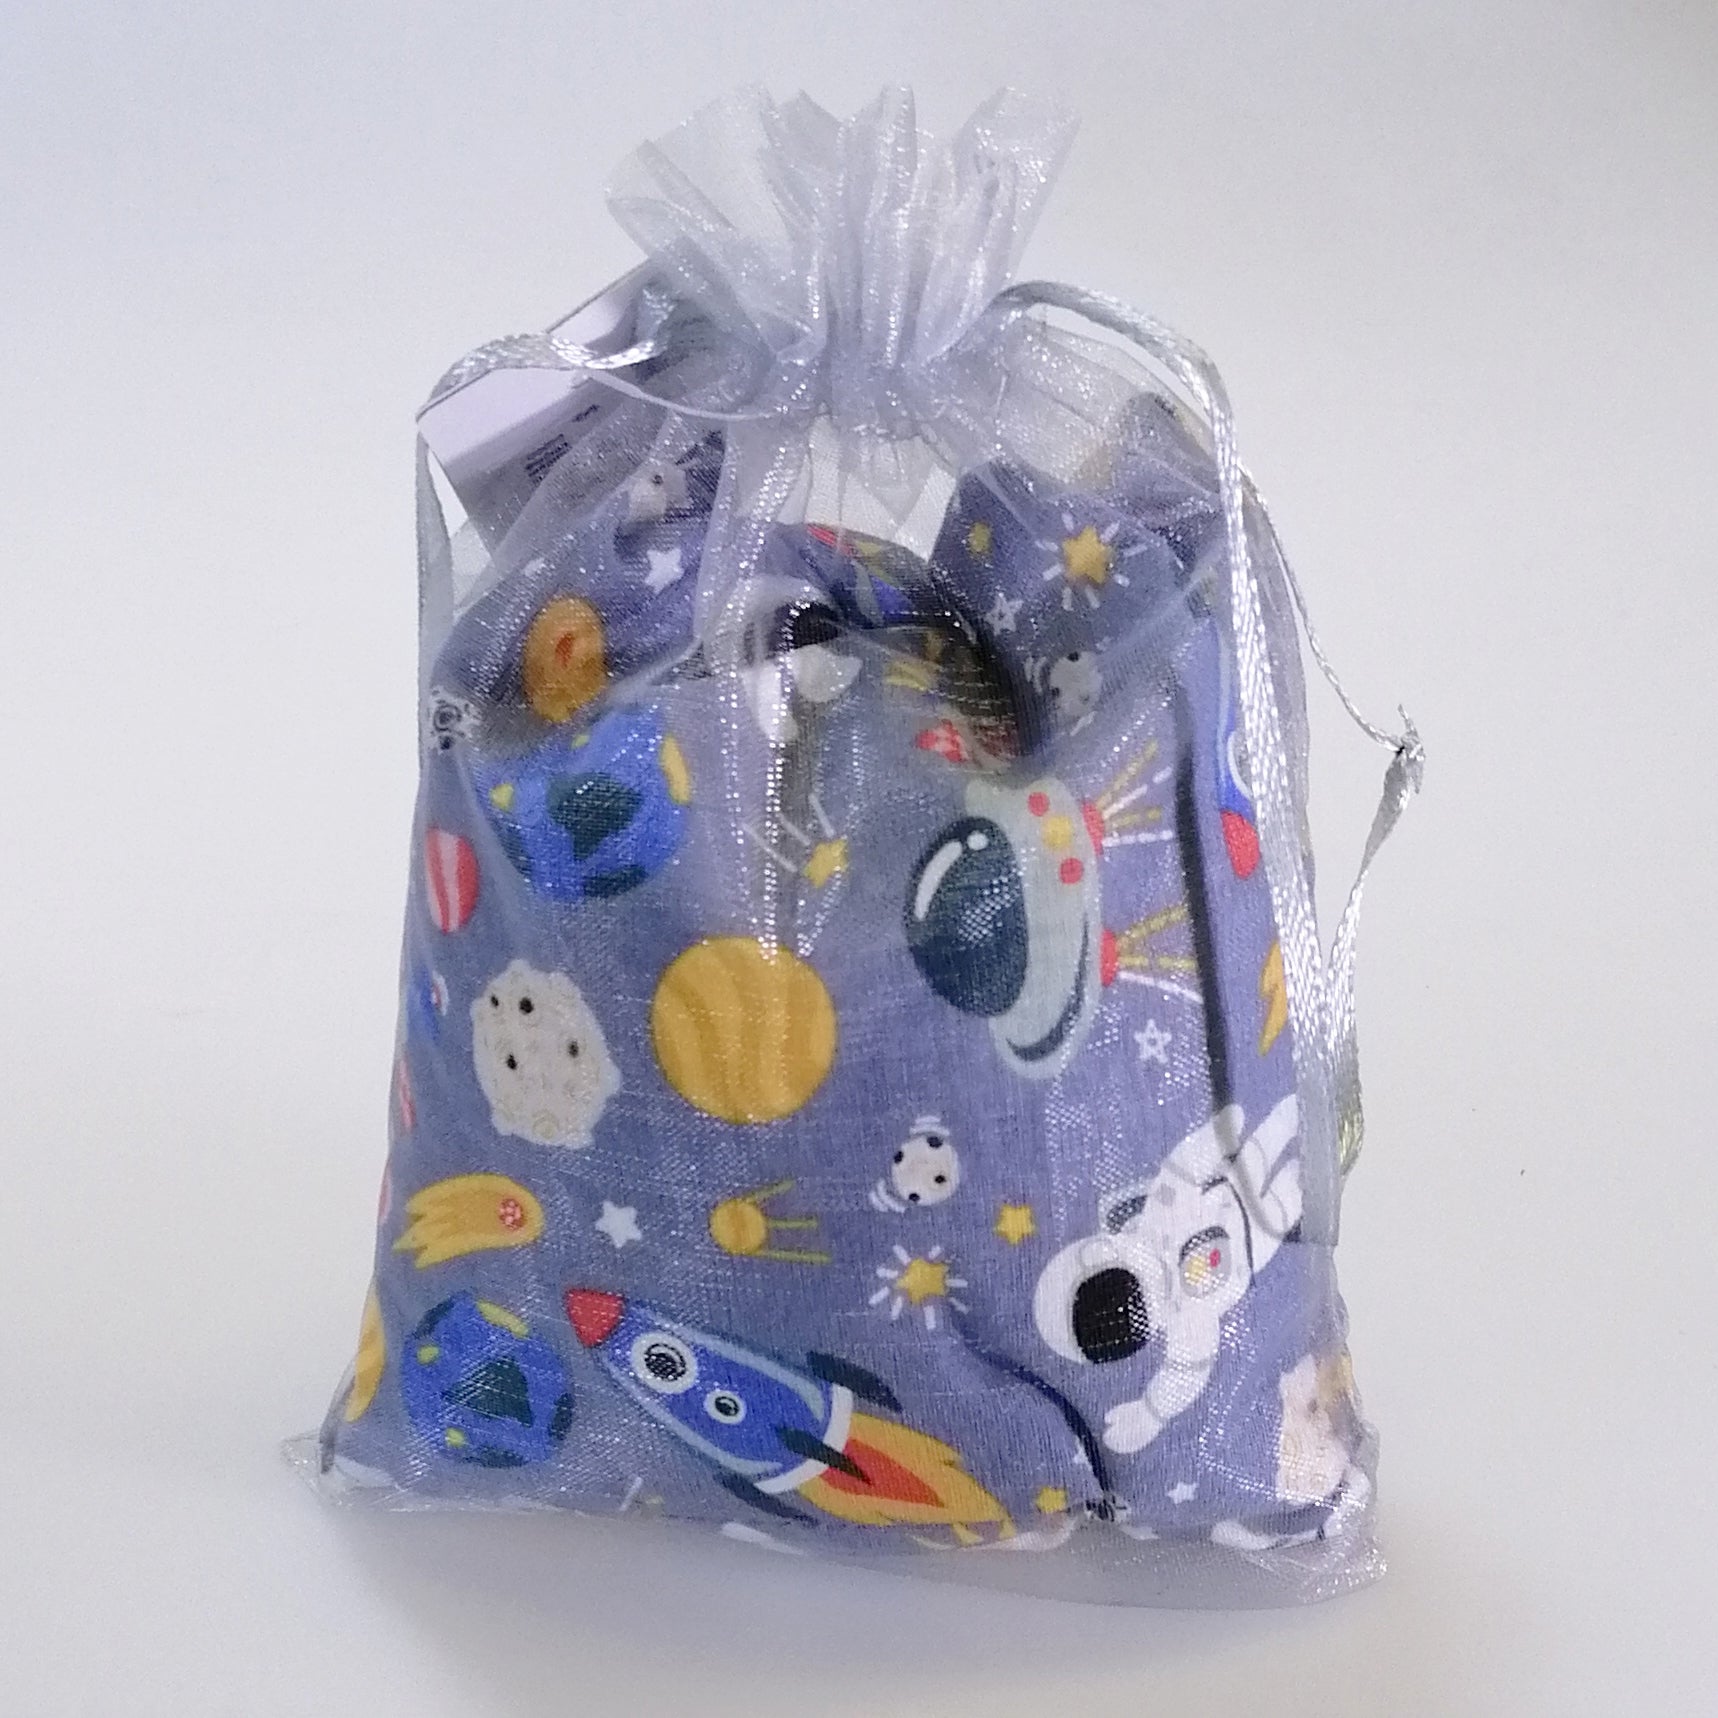 Kids 'Ouchie' Pack - Cold Compress Wheat Bag - Space